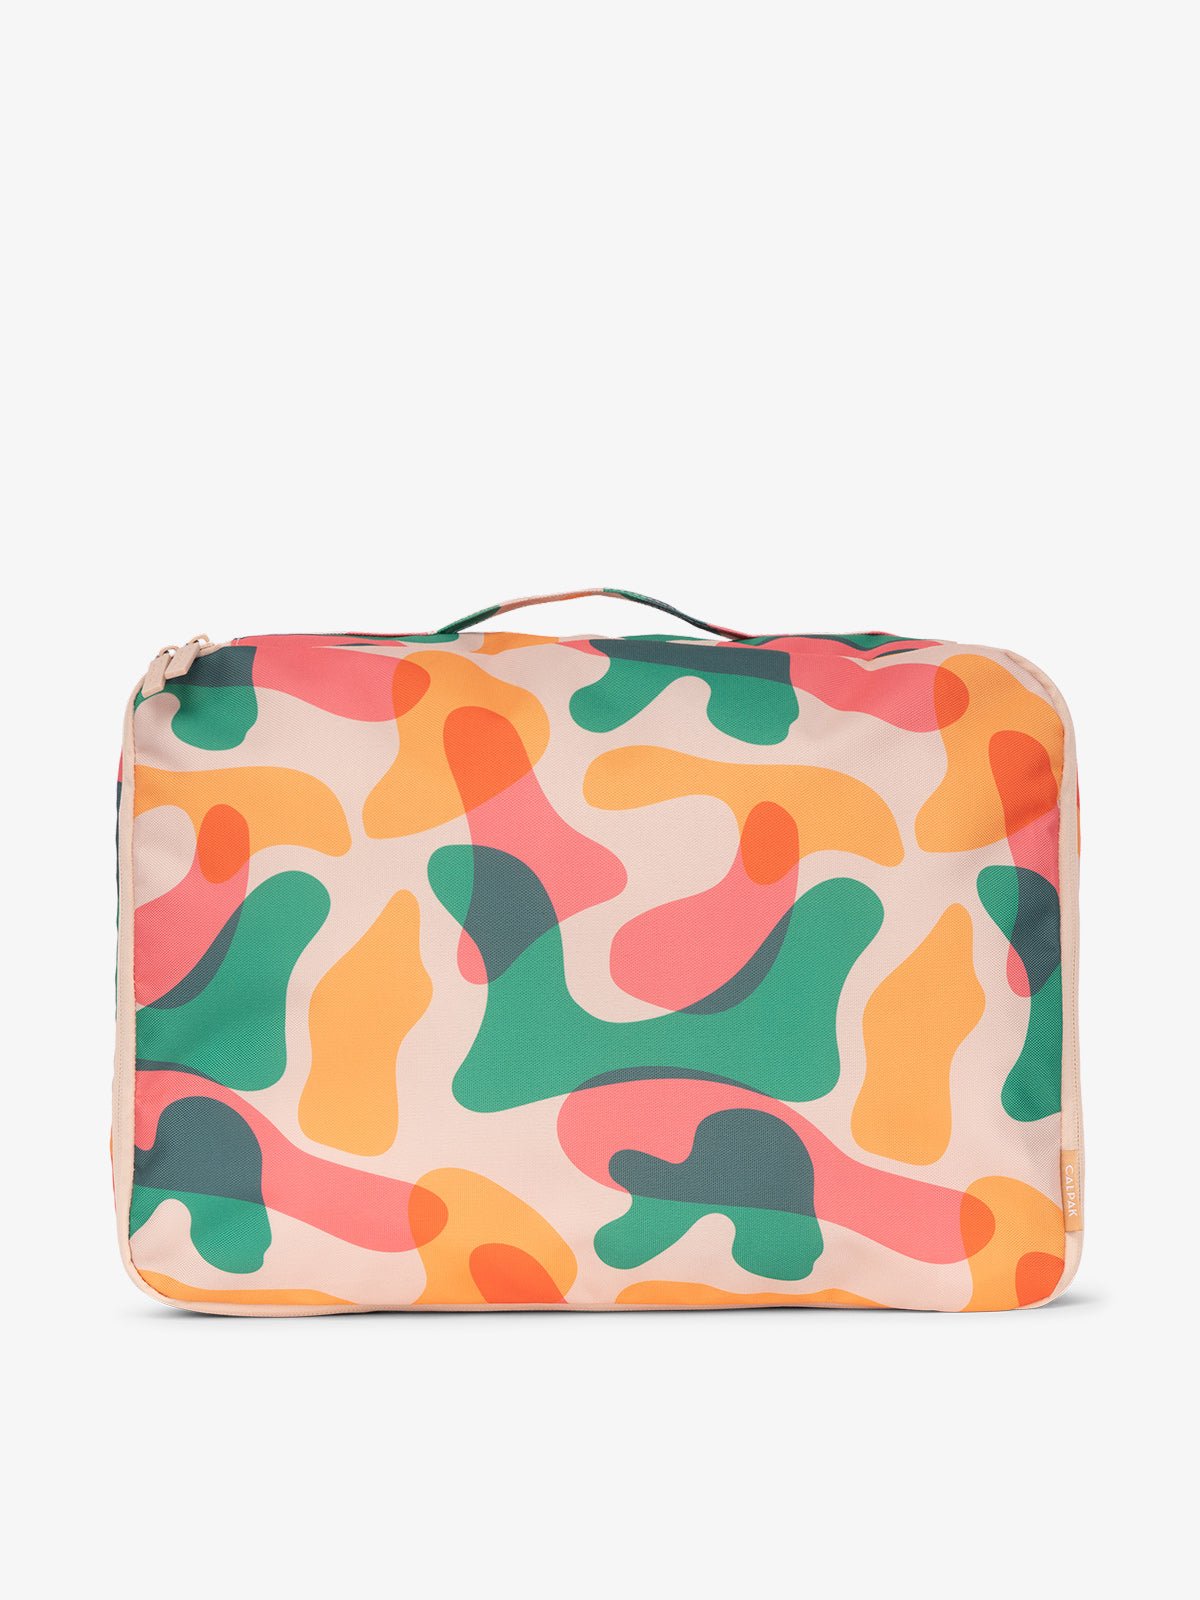 CALPAK large packing cubes with top handle in pink and green abstract print